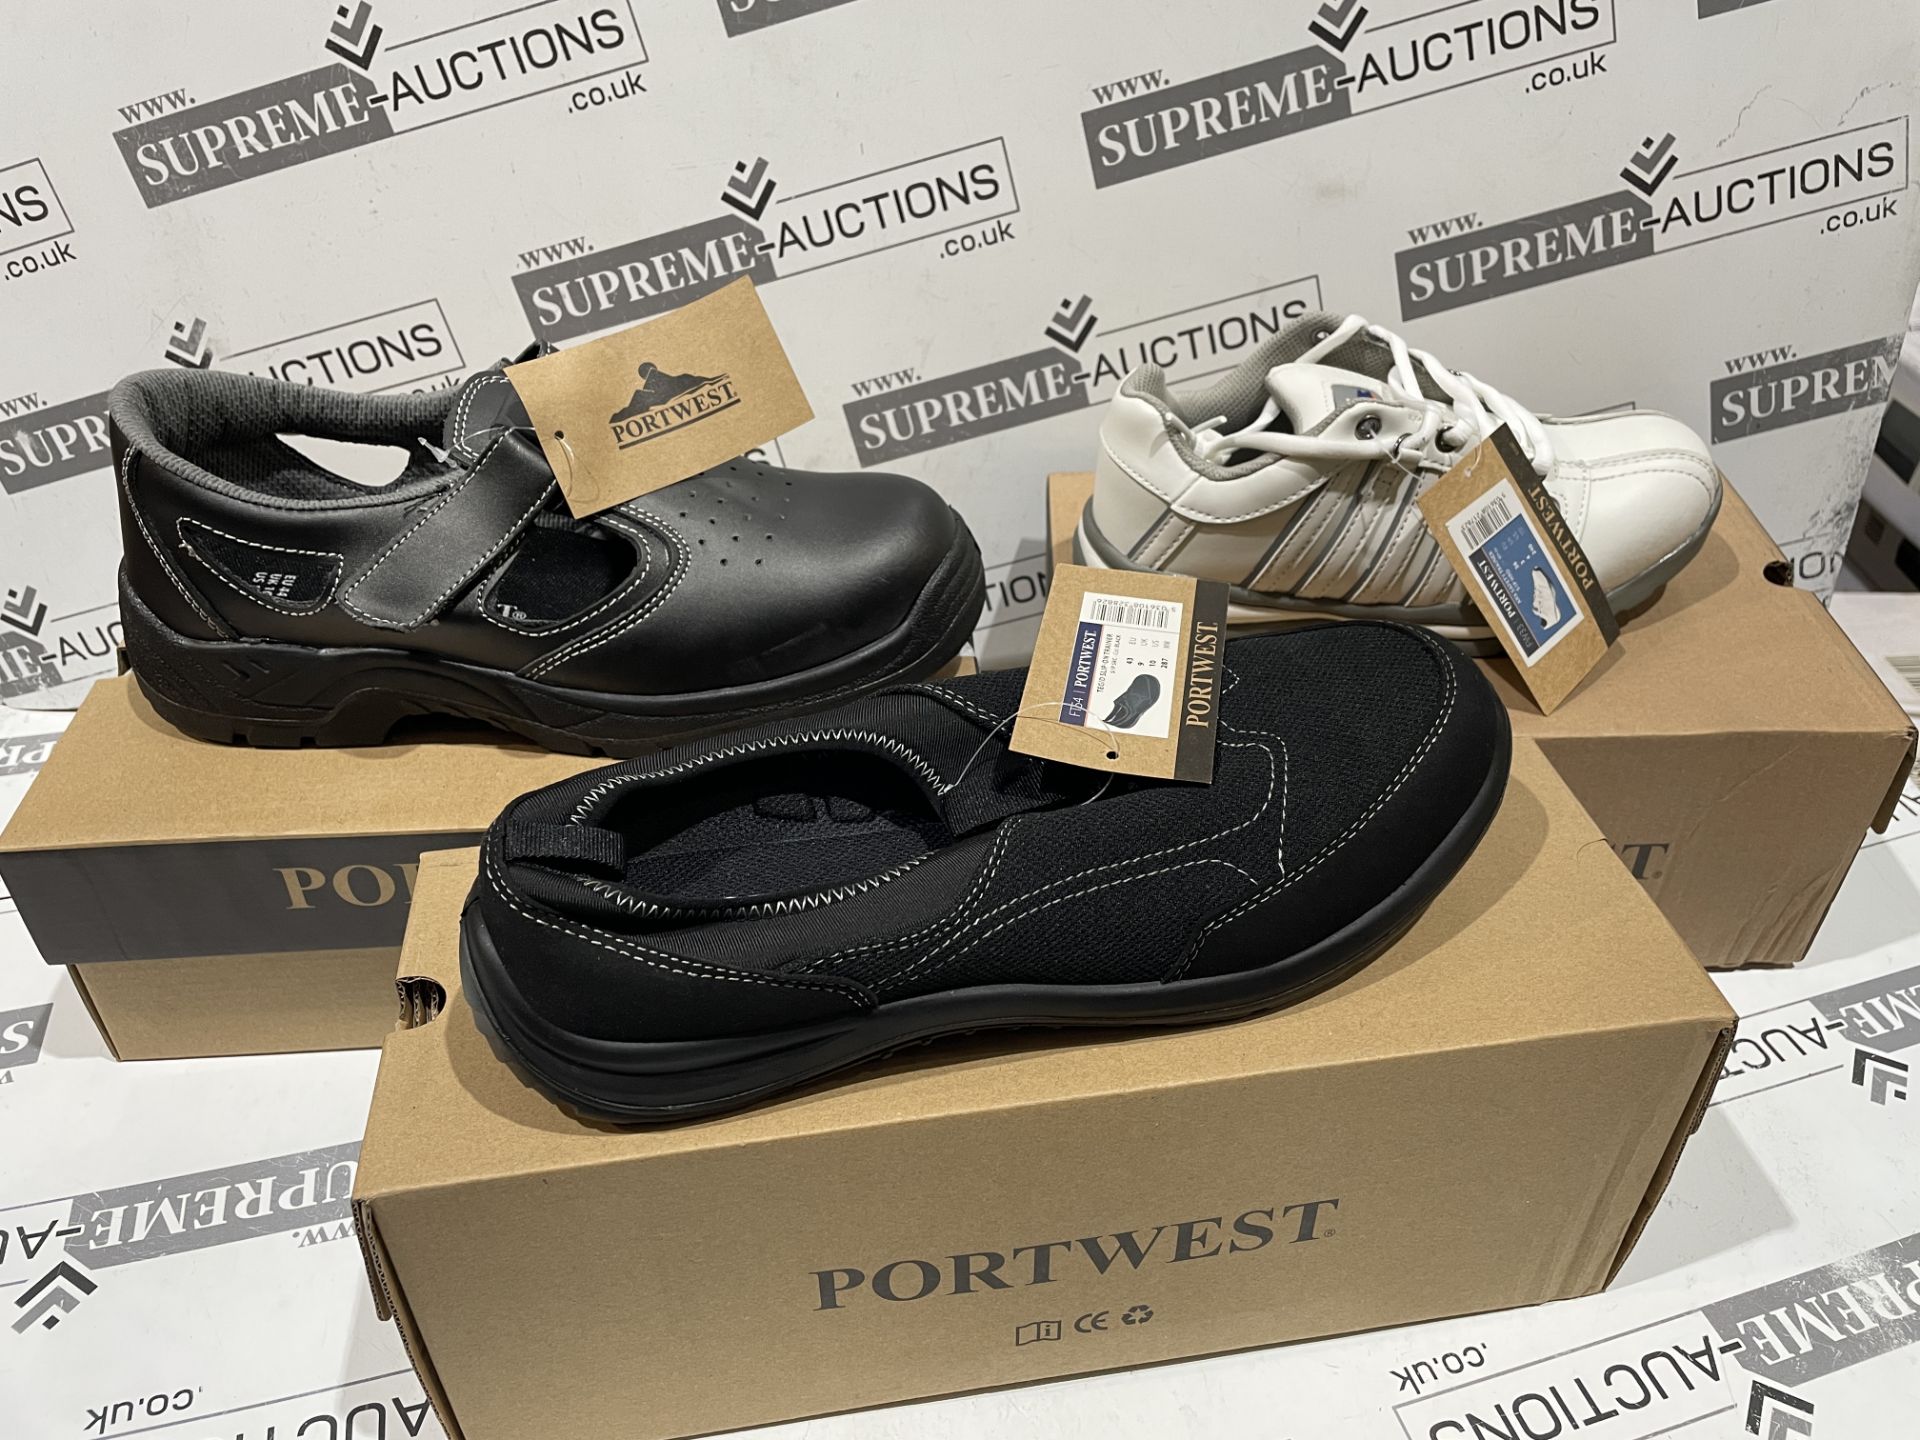 15 X BRAND NEW PAIRS OF PORTWEST PROFESSIONAL SAFETY SHOES IN VARIOUS DESIGNS AND SIZES INSL